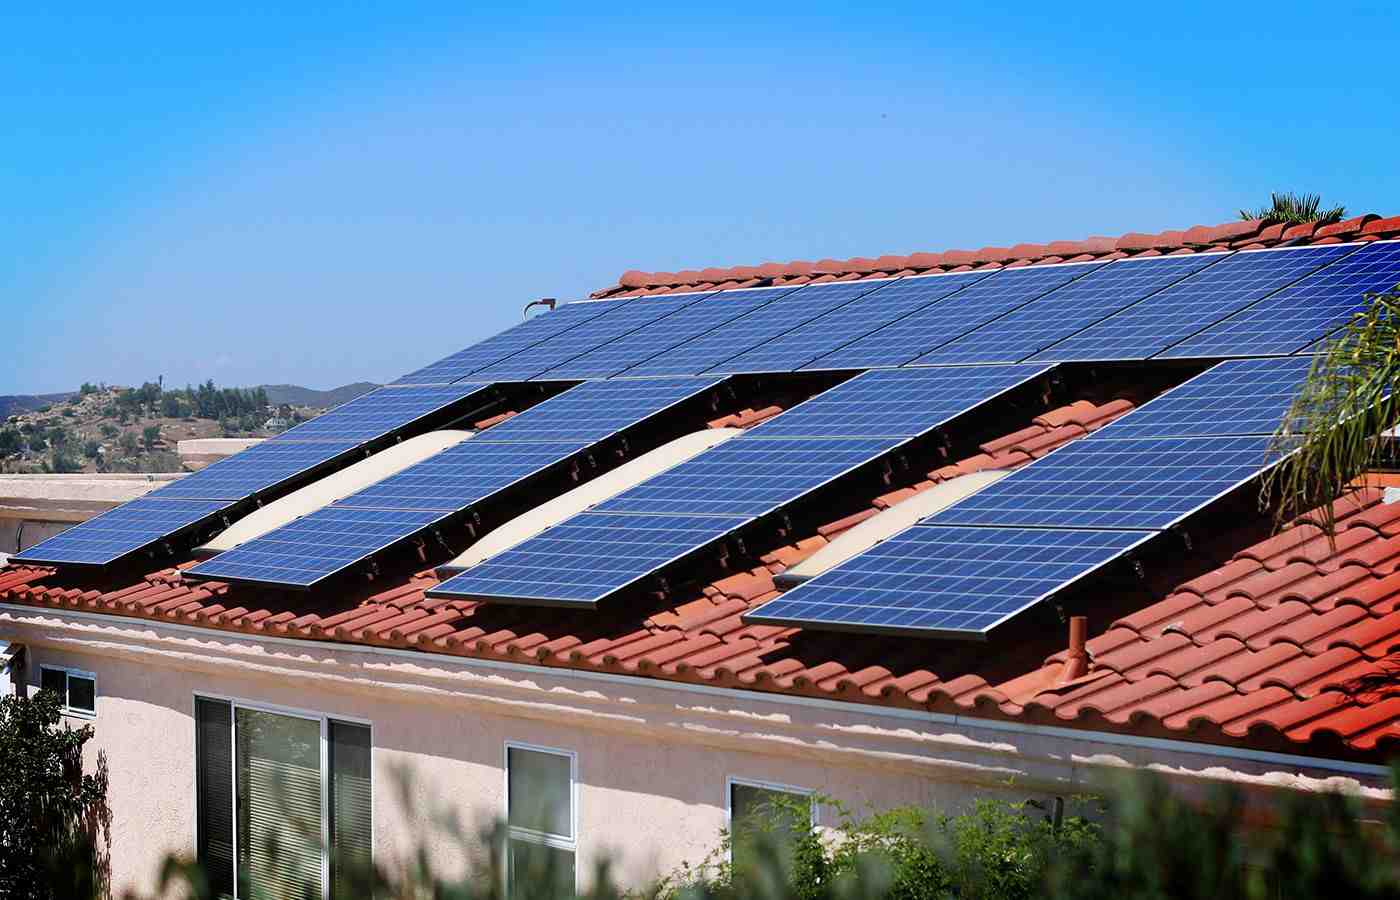 What are the best solar panels right now?